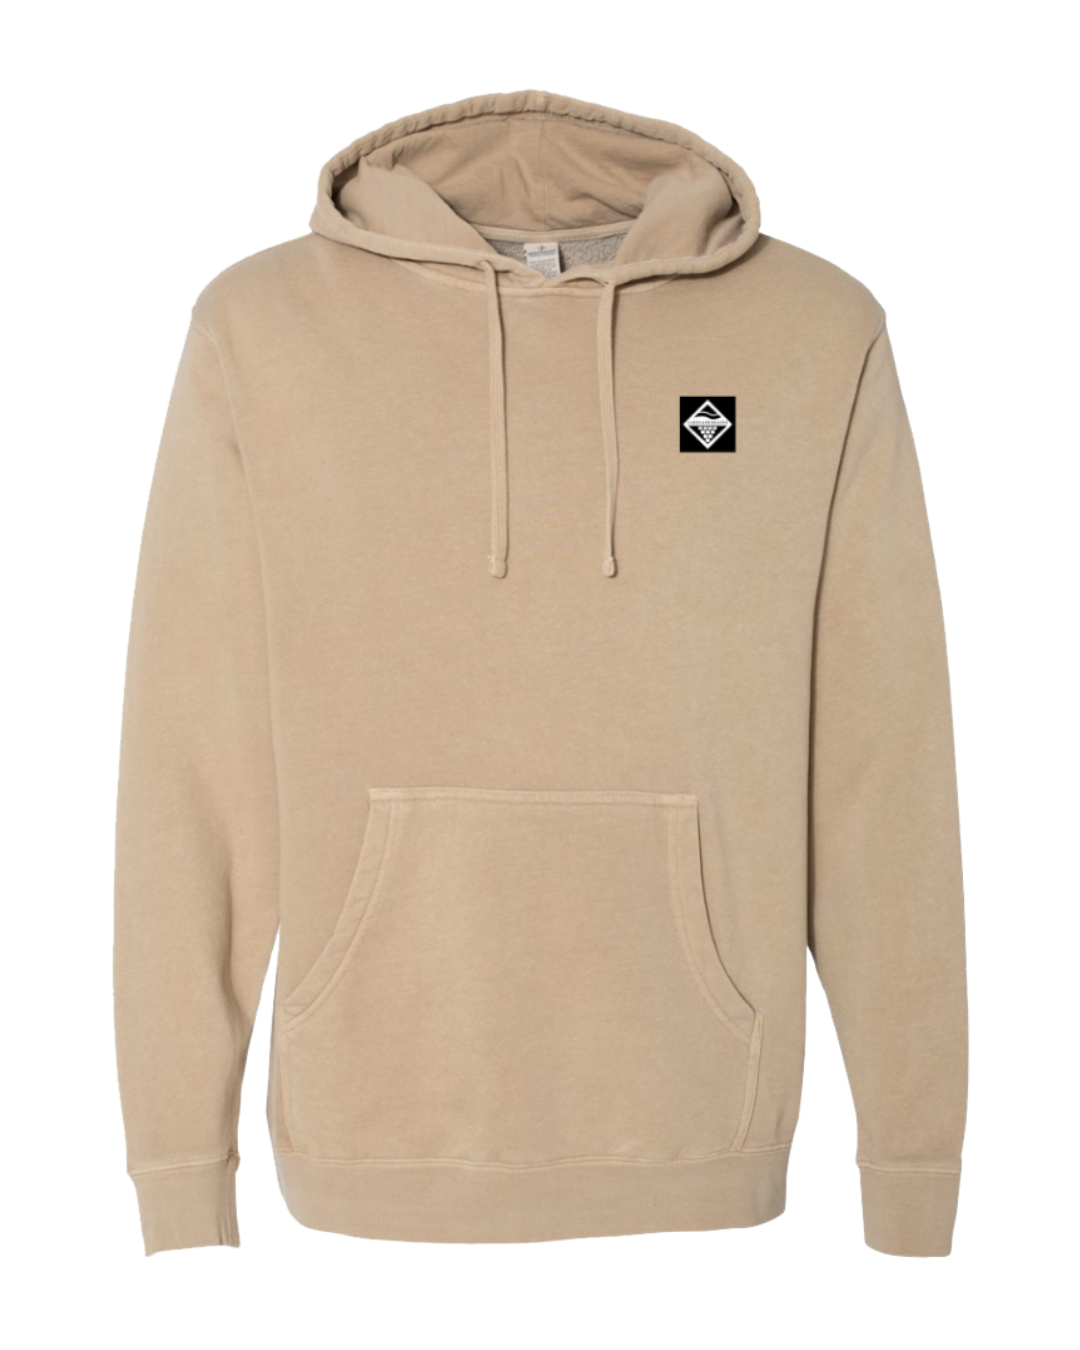 In this image we have The Wave Wash Lounge Hoodie. Made from soft, high-quality fabric, this hoodie features a relaxed fit and a unique wave wash texture, giving it a casual and laid-back look.